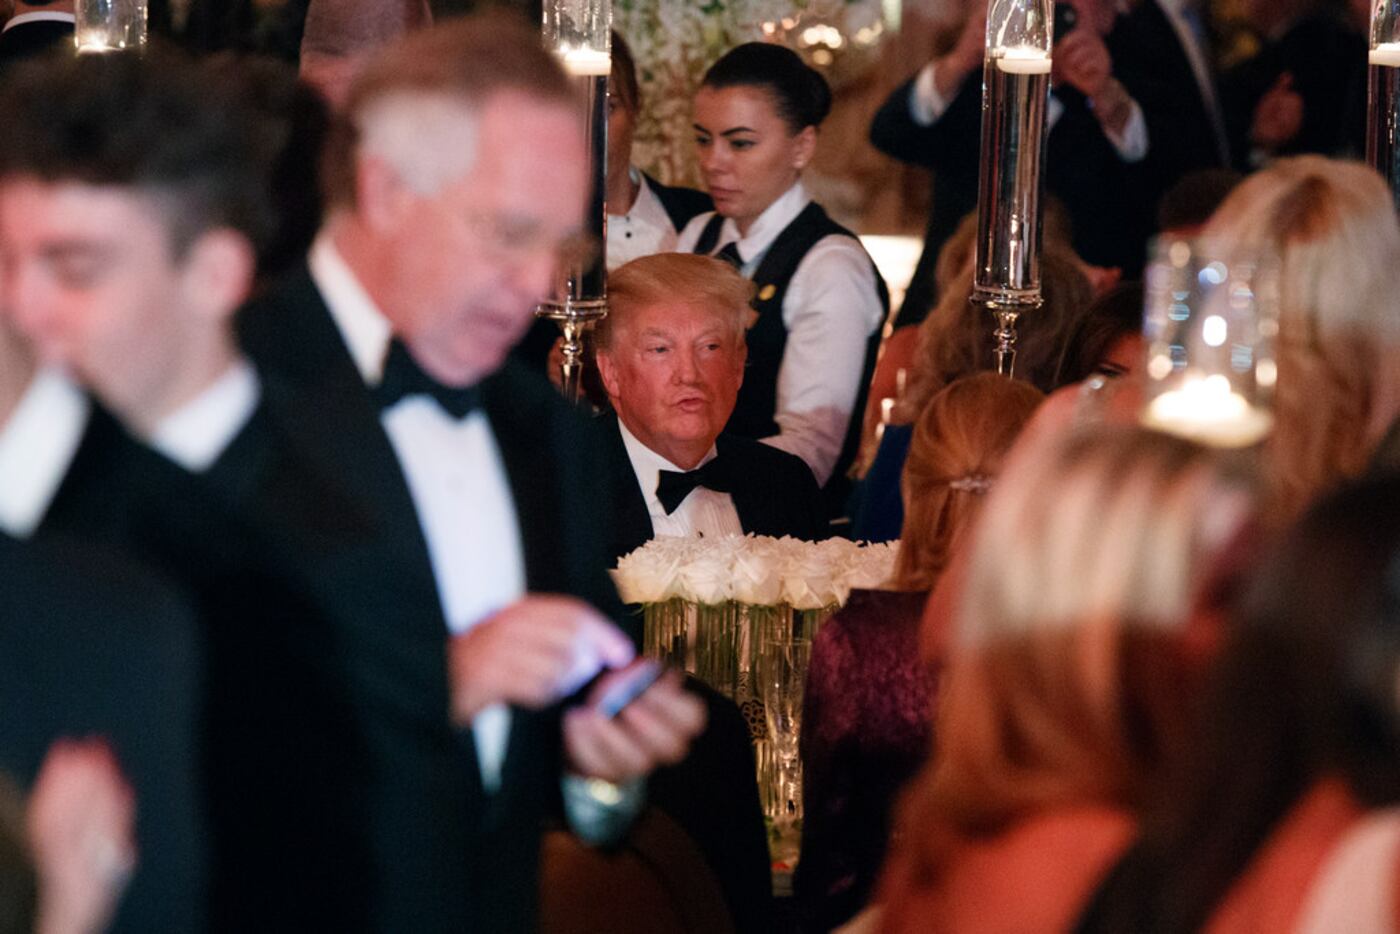 President Donald Trump sits at his table during a New Year's Eve gala at his Mar-a-Lago...